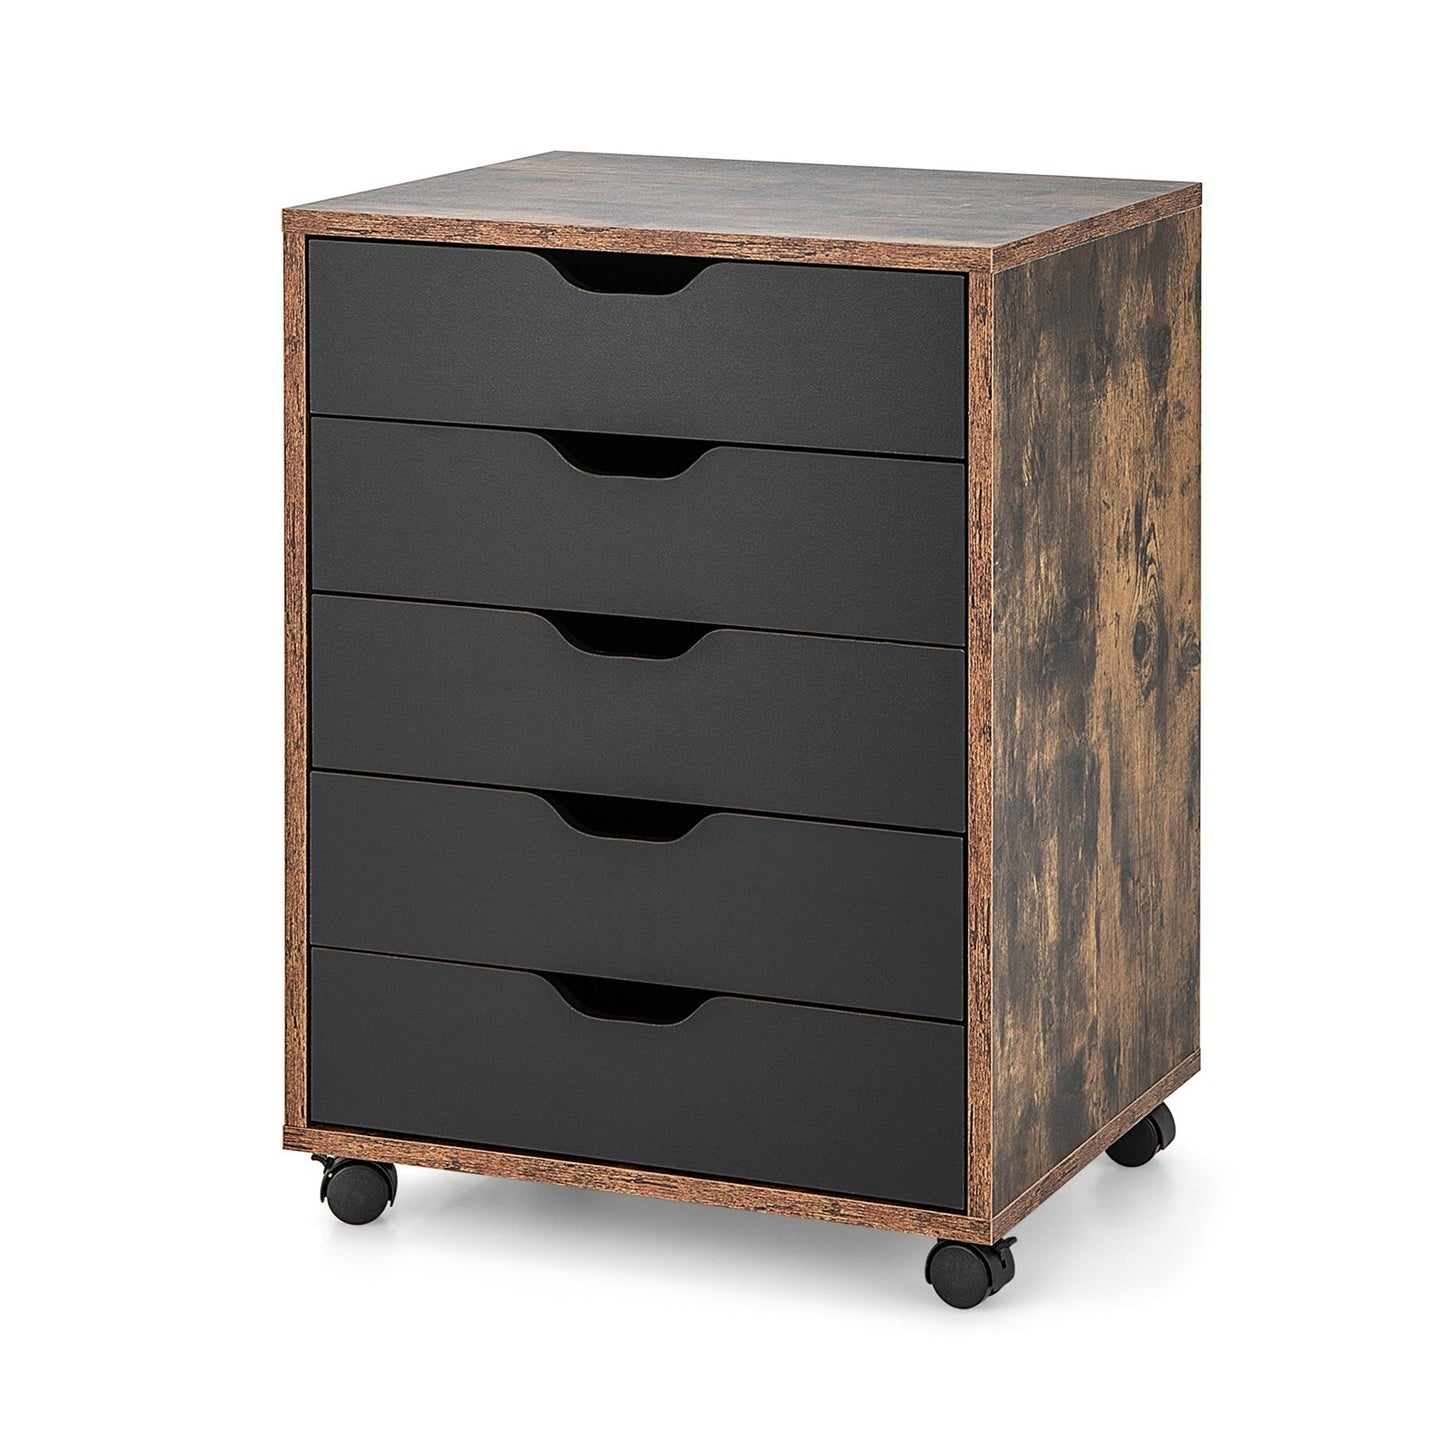 5 Drawer Mobile Lateral Filing Storage Home Office Floor Cabinet with Wheels, Rustic Brown